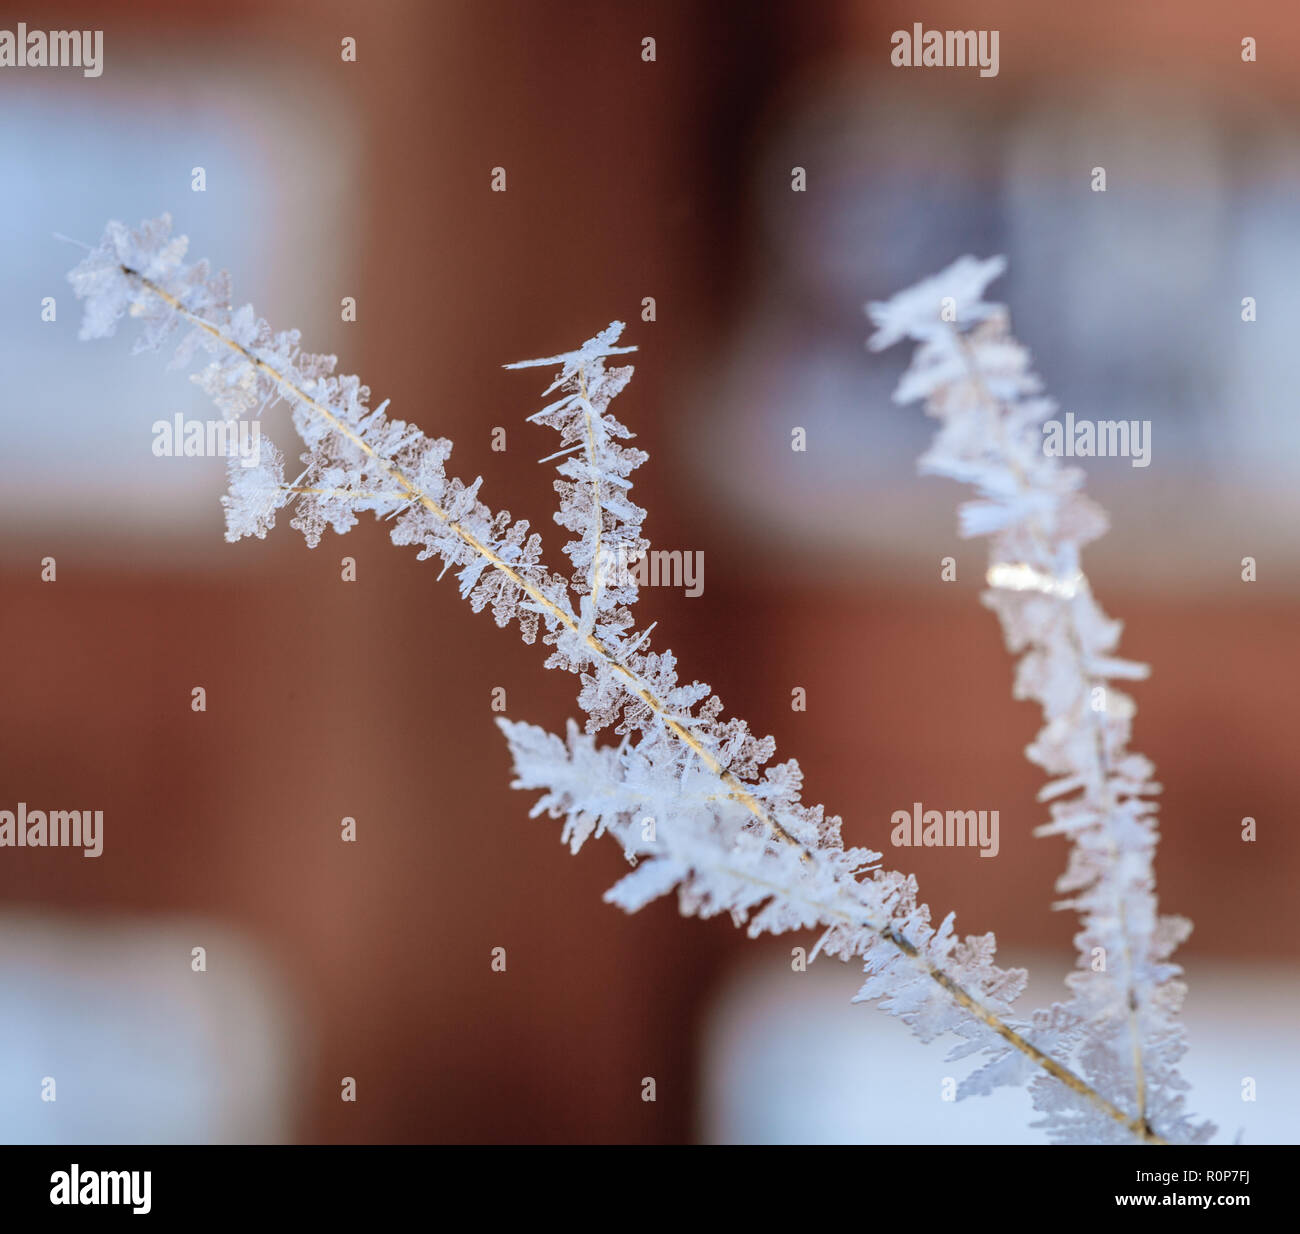 Closeup image of ice crystals covering thin branch after ice storm Stock Photo